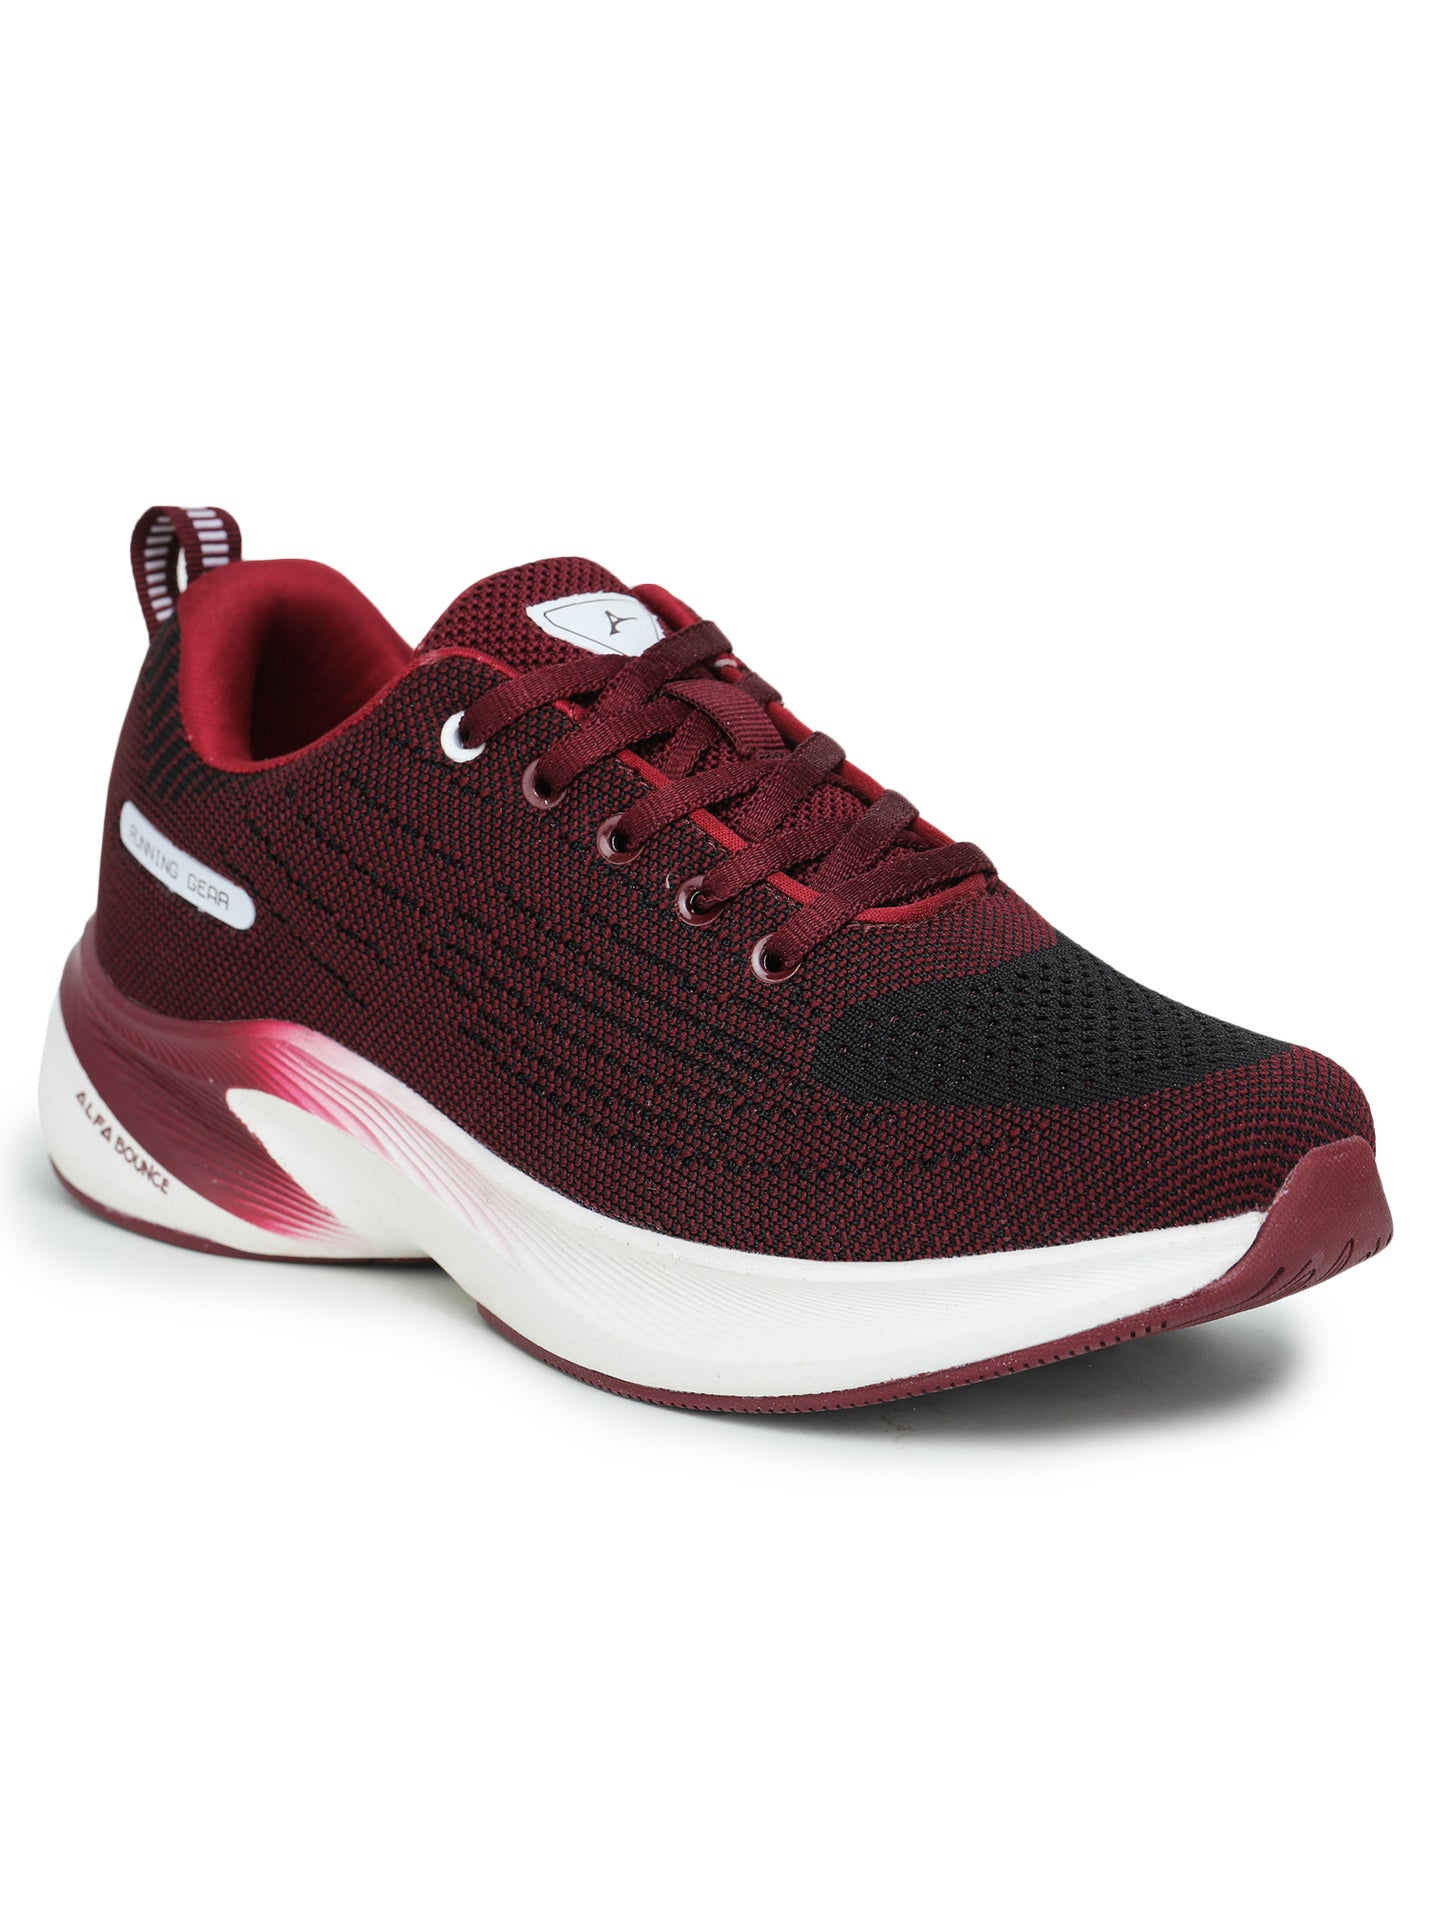 ABROS ULTIMATE SPORTS SHOES FOR MEN